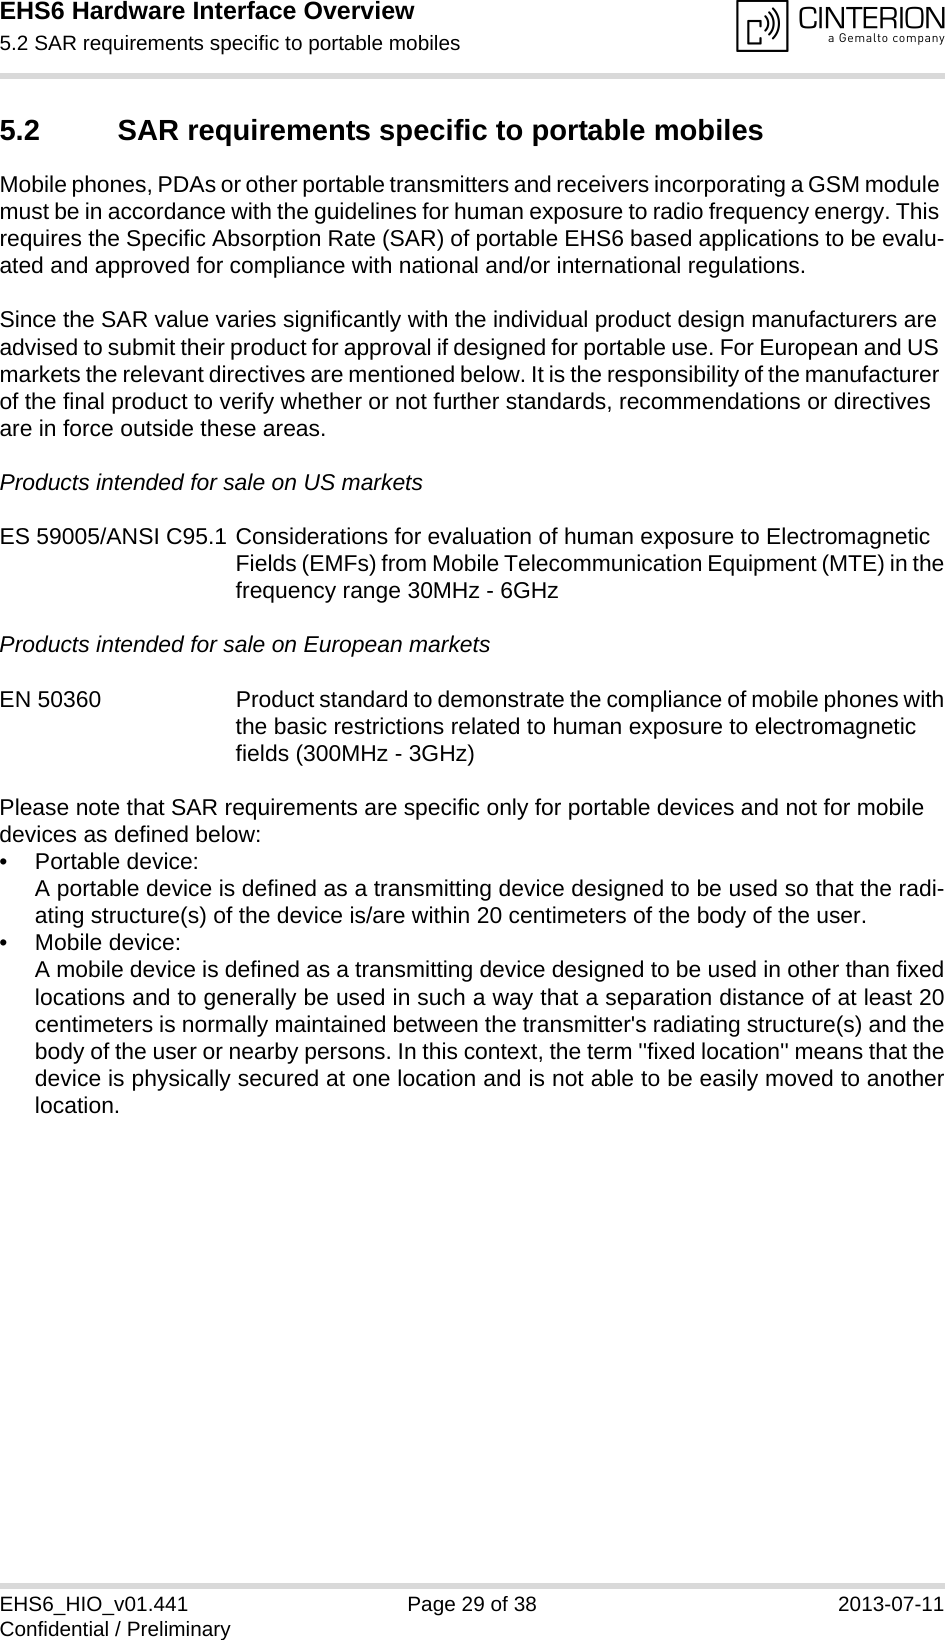 EHS6 Hardware Interface Overview5.2 SAR requirements specific to portable mobiles31EHS6_HIO_v01.441 Page 29 of 38 2013-07-11Confidential / Preliminary5.2 SAR requirements specific to portable mobilesMobile phones, PDAs or other portable transmitters and receivers incorporating a GSM module must be in accordance with the guidelines for human exposure to radio frequency energy. This requires the Specific Absorption Rate (SAR) of portable EHS6 based applications to be evalu-ated and approved for compliance with national and/or international regulations. Since the SAR value varies significantly with the individual product design manufacturers are advised to submit their product for approval if designed for portable use. For European and US markets the relevant directives are mentioned below. It is the responsibility of the manufacturer of the final product to verify whether or not further standards, recommendations or directives are in force outside these areas. Products intended for sale on US marketsES 59005/ANSI C95.1 Considerations for evaluation of human exposure to Electromagnetic Fields (EMFs) from Mobile Telecommunication Equipment (MTE) in thefrequency range 30MHz - 6GHz Products intended for sale on European marketsEN 50360 Product standard to demonstrate the compliance of mobile phones withthe basic restrictions related to human exposure to electromagnetic fields (300MHz - 3GHz)Please note that SAR requirements are specific only for portable devices and not for mobile devices as defined below:• Portable device:A portable device is defined as a transmitting device designed to be used so that the radi-ating structure(s) of the device is/are within 20 centimeters of the body of the user.• Mobile device:A mobile device is defined as a transmitting device designed to be used in other than fixedlocations and to generally be used in such a way that a separation distance of at least 20centimeters is normally maintained between the transmitter&apos;s radiating structure(s) and thebody of the user or nearby persons. In this context, the term &apos;&apos;fixed location&apos;&apos; means that thedevice is physically secured at one location and is not able to be easily moved to anotherlocation.